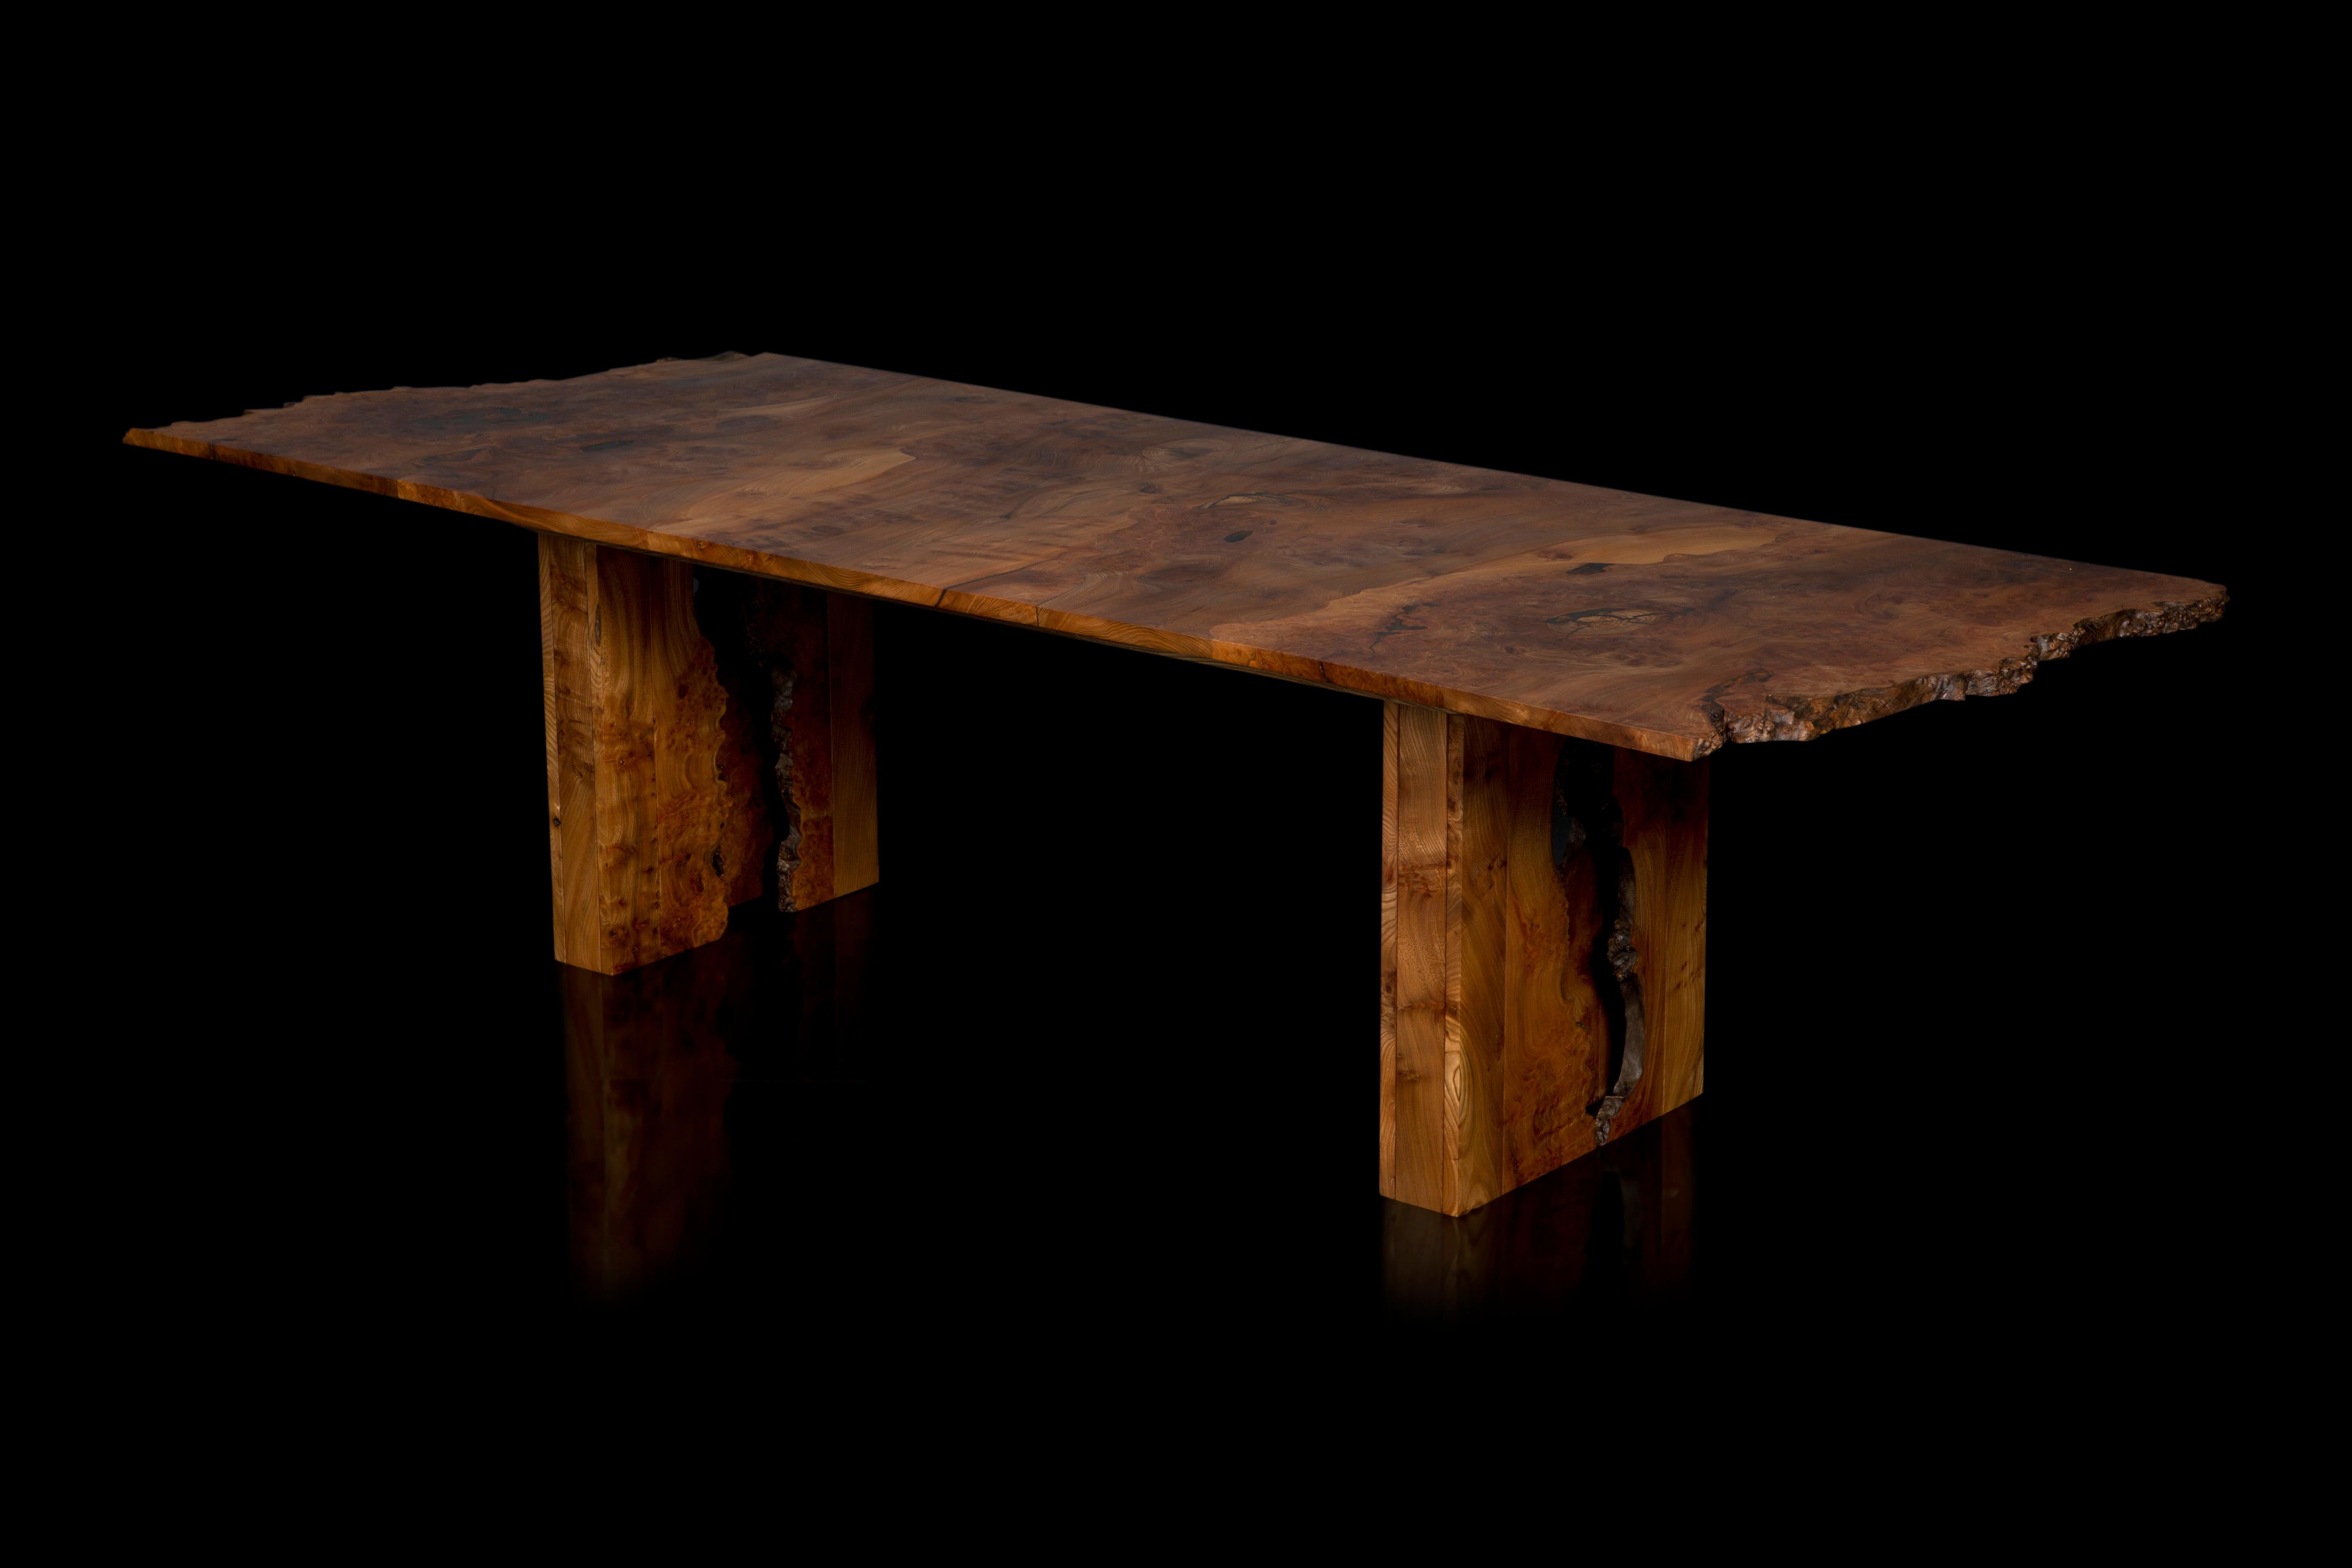 Elm dining table with cross-grained top and inverted live edge legs.

The table pictured was the first to be made in 2019 from a very striking Scottish burr elm timber that has a wonderfully rich conker brown colour when oiled, we have enough of